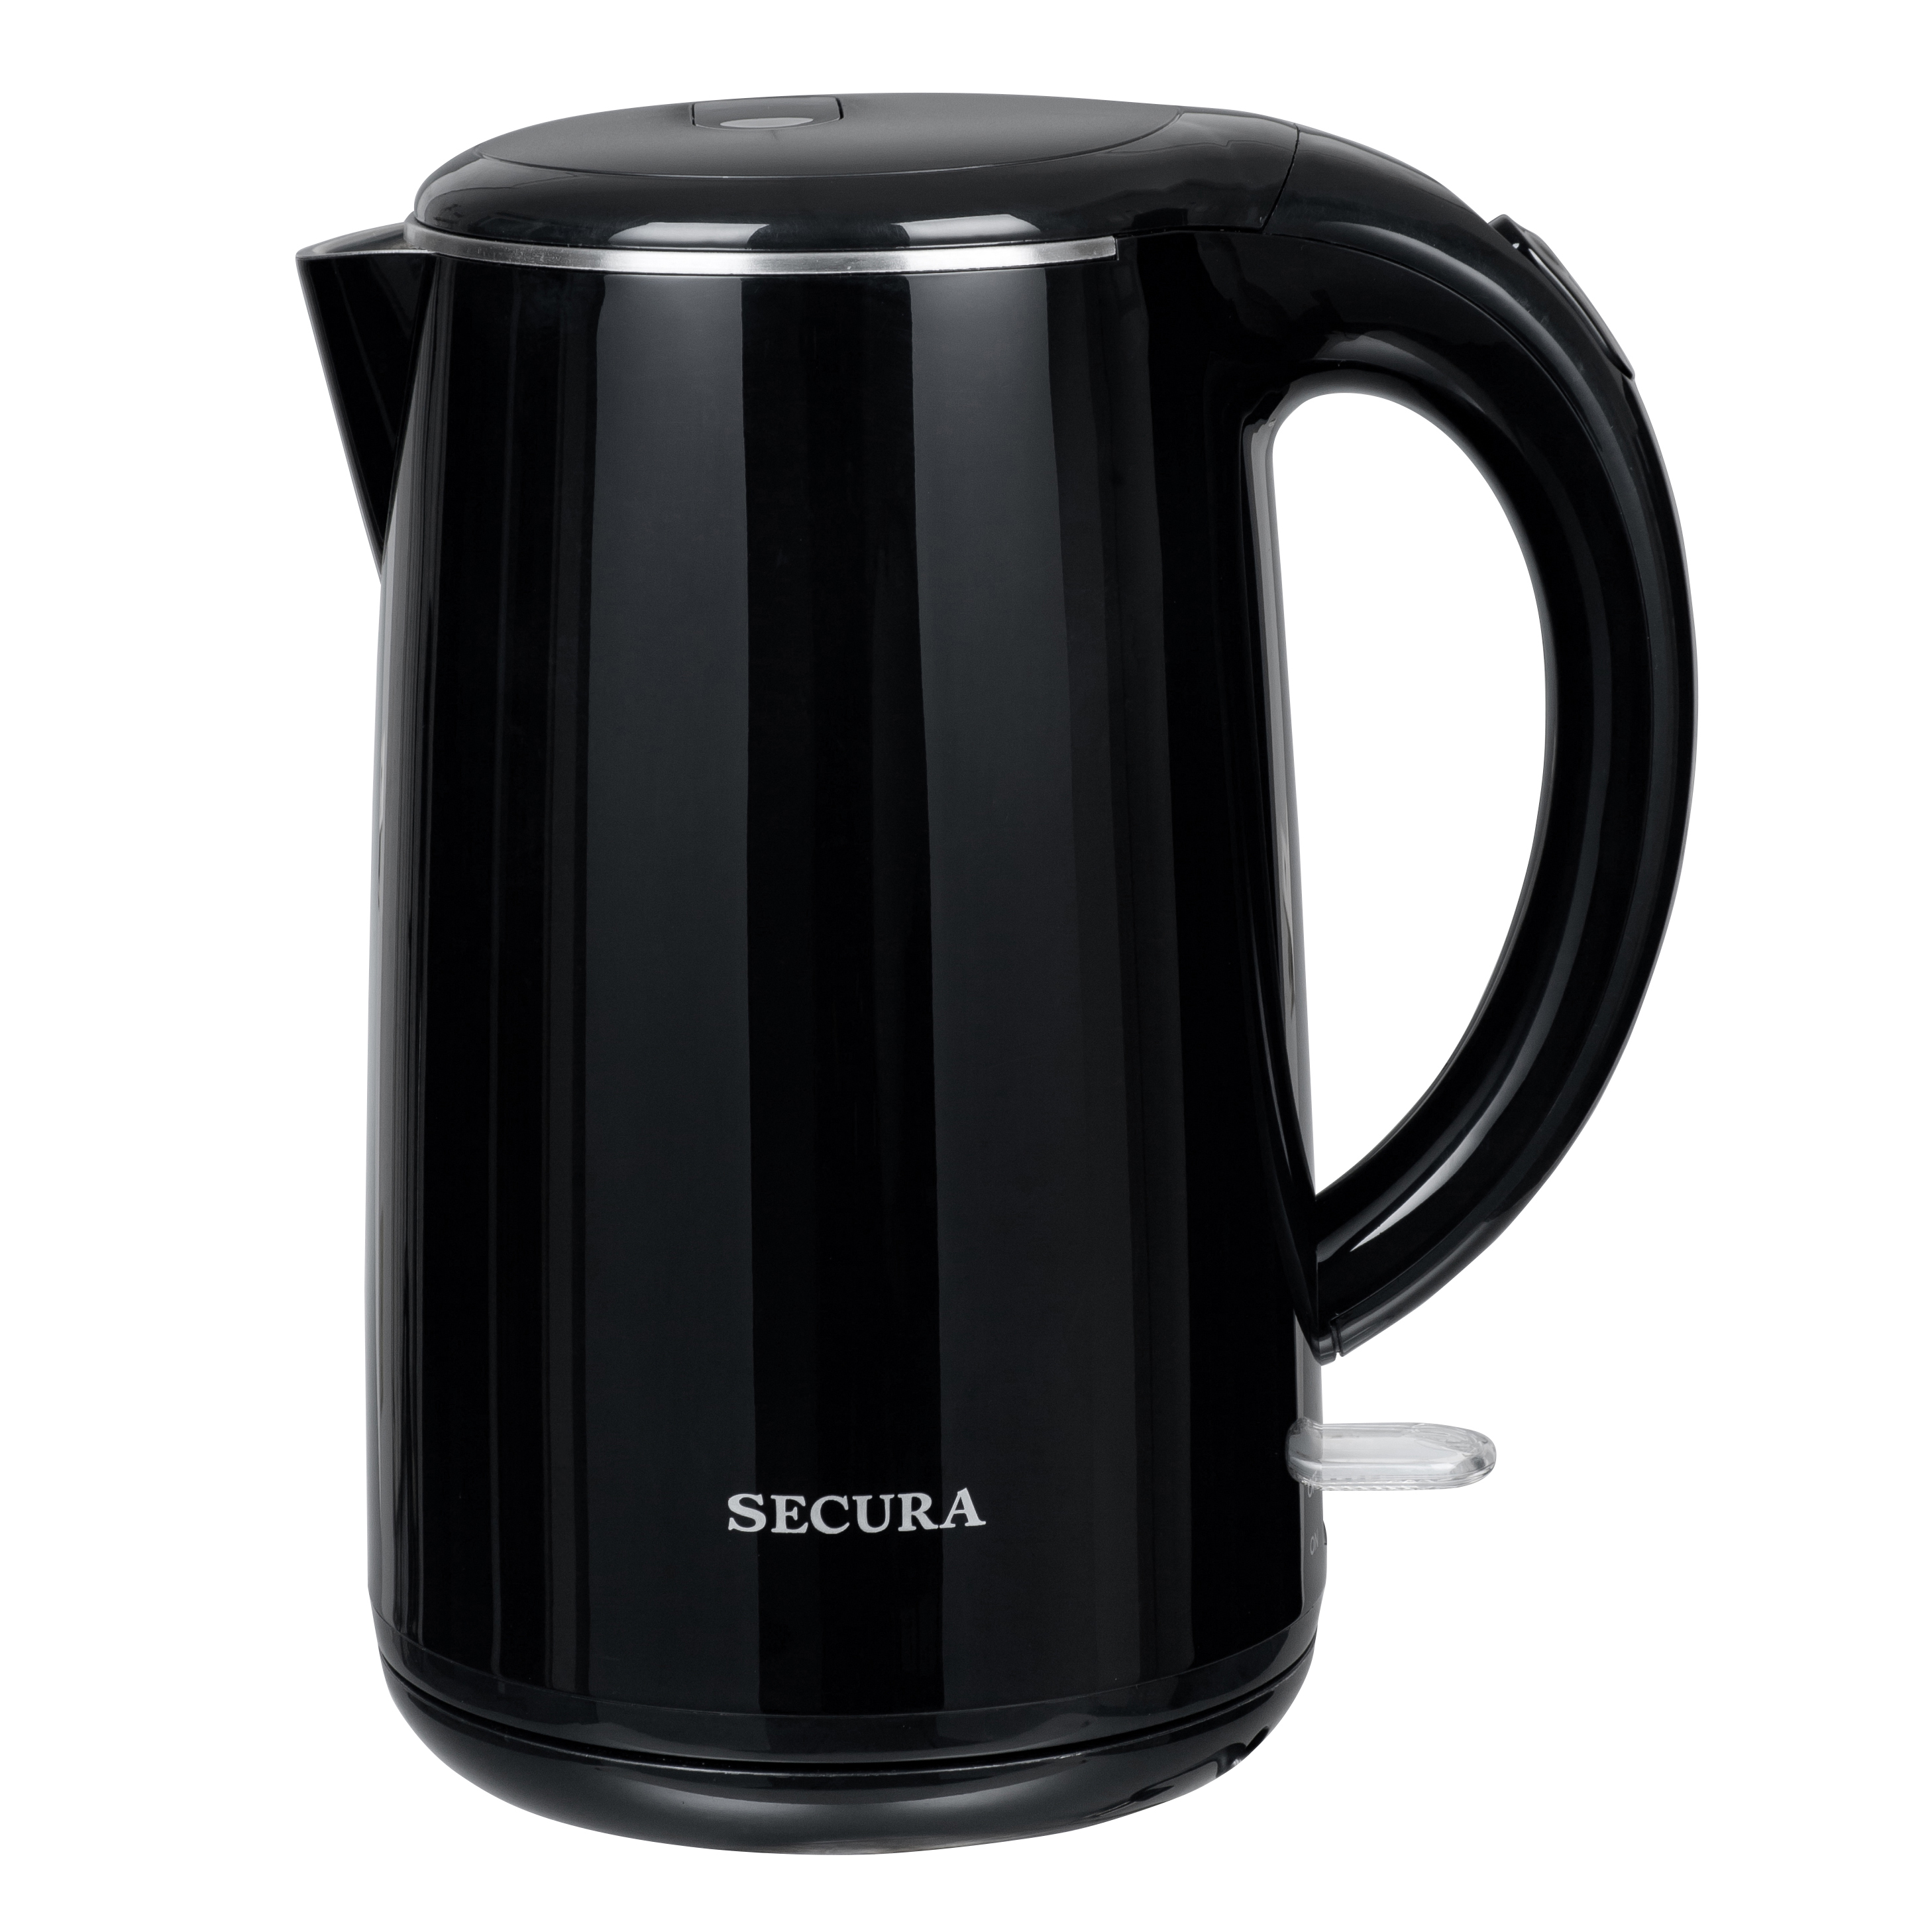 1 8 Quart Stainless Steel Cordless Electric Kettle The Secura